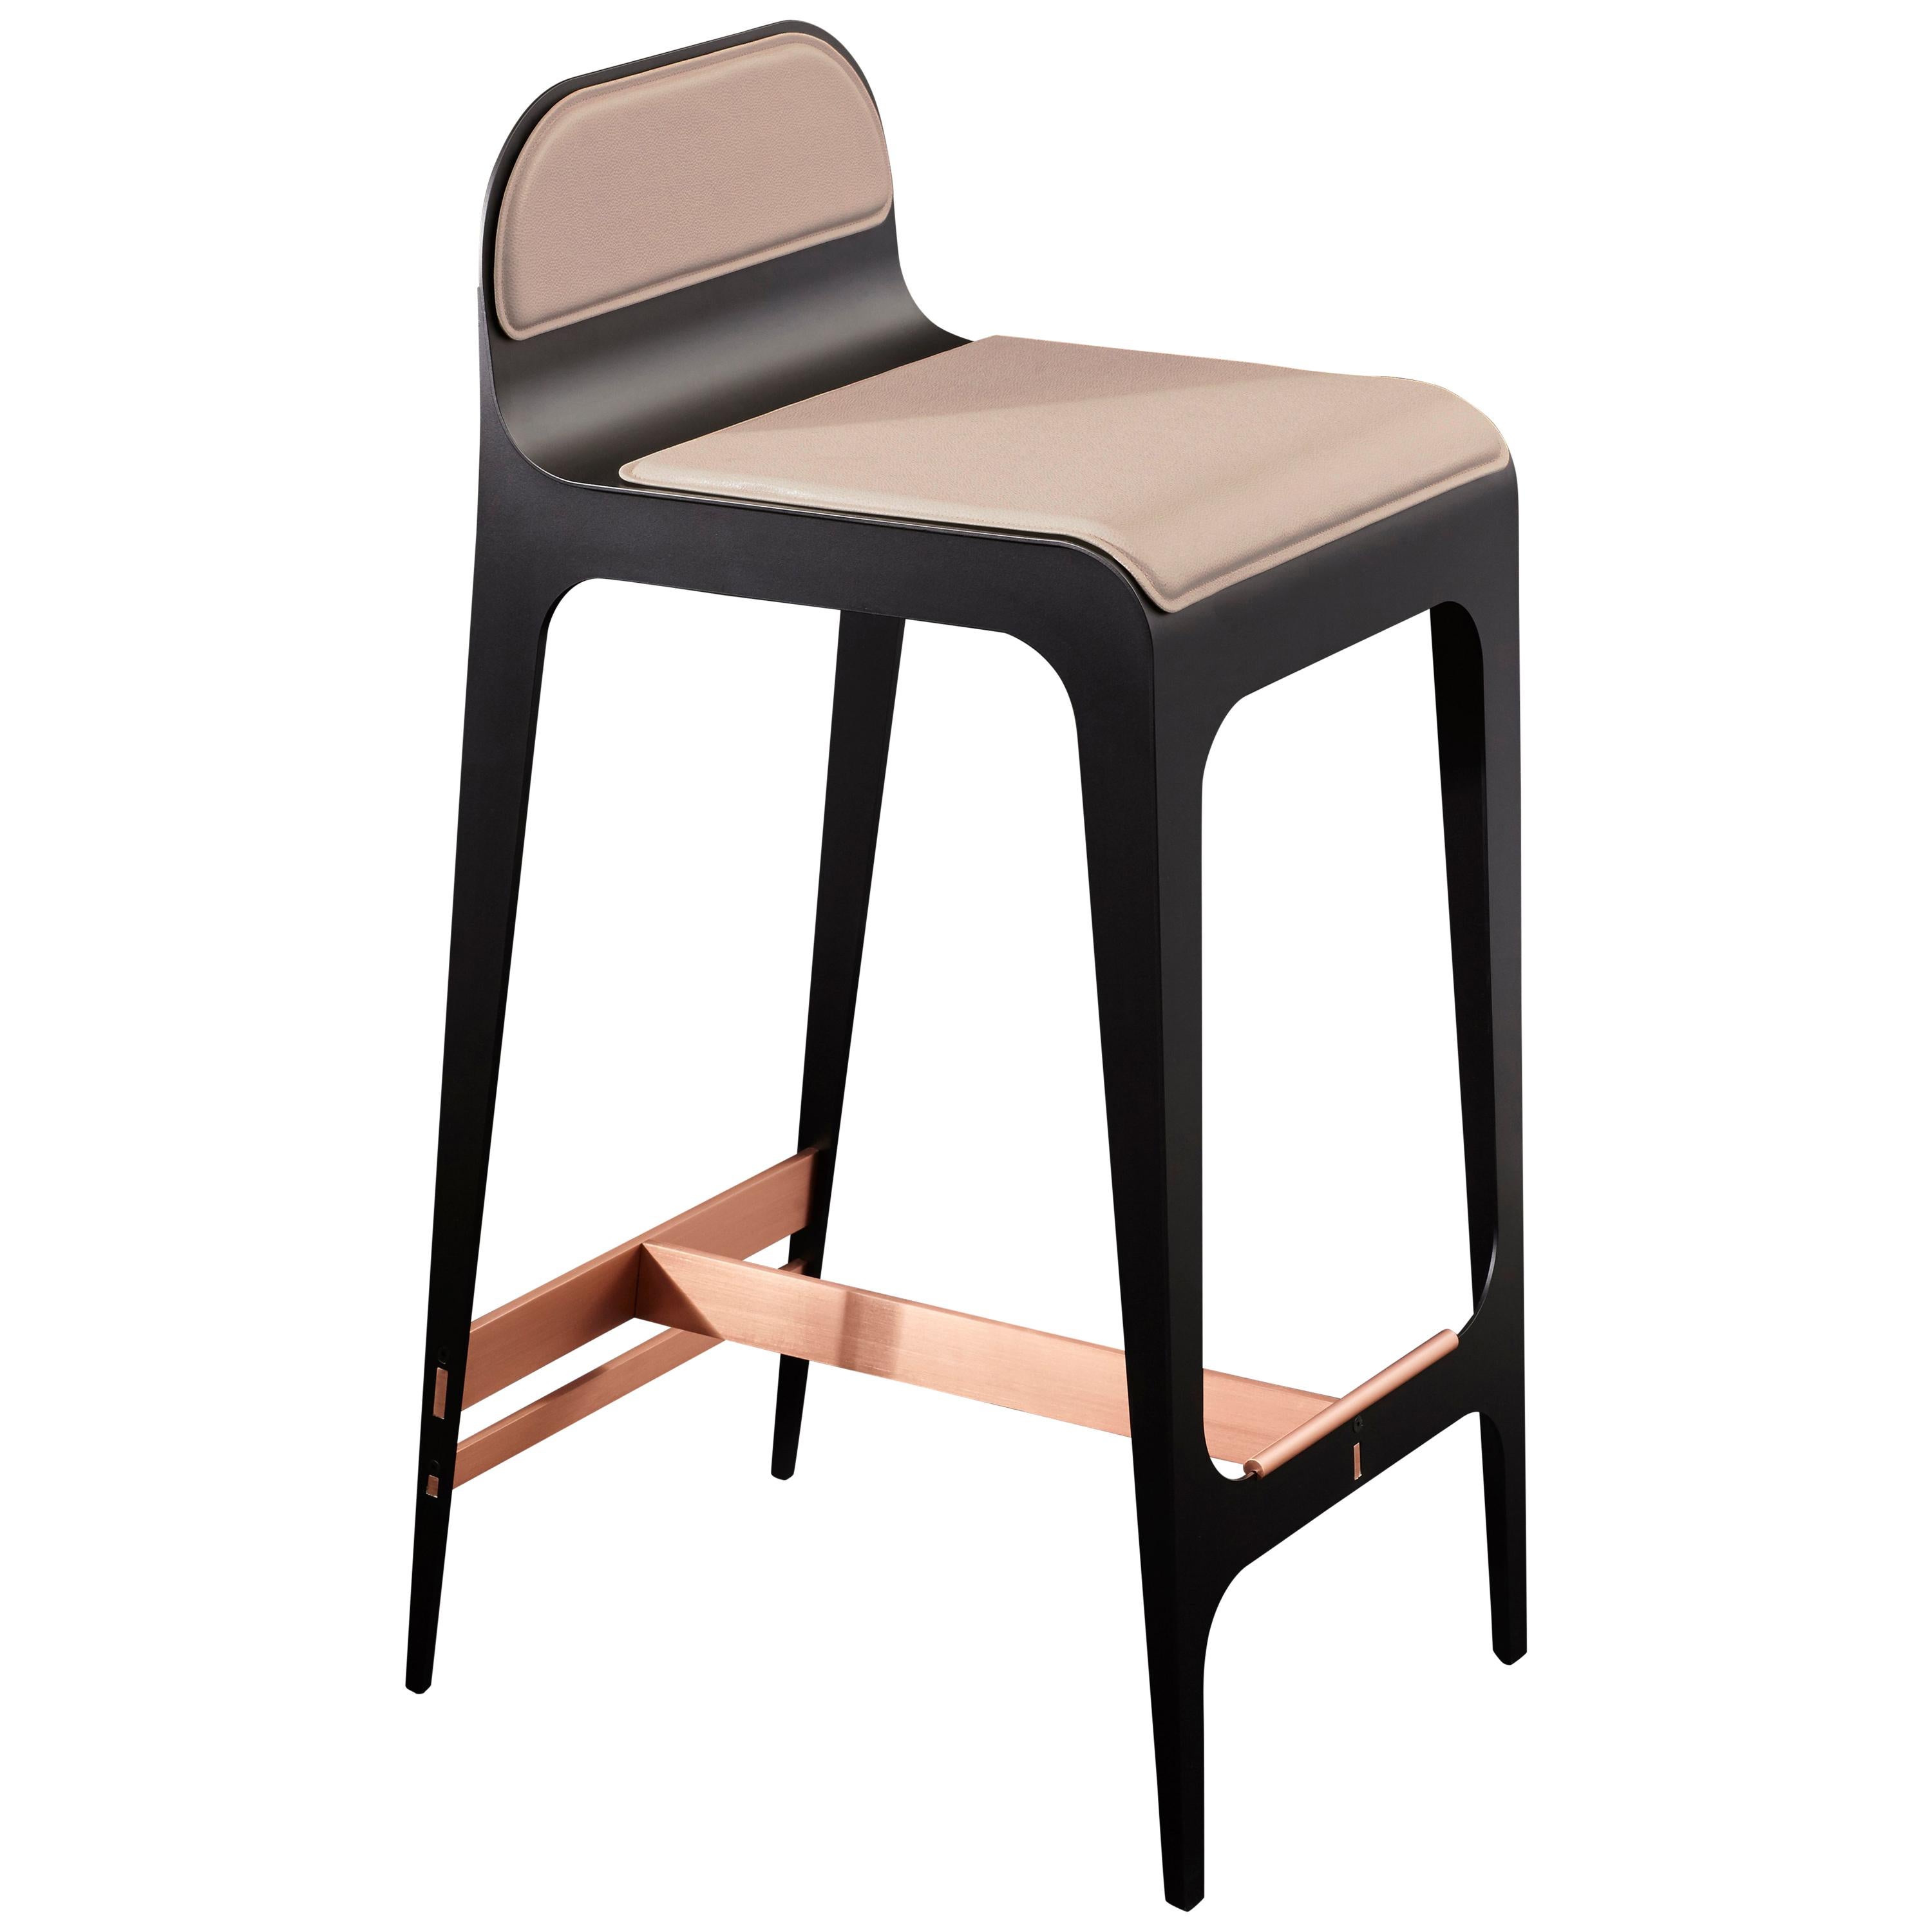 Bardot Stool in Nude and Copper by Gabriel Scott